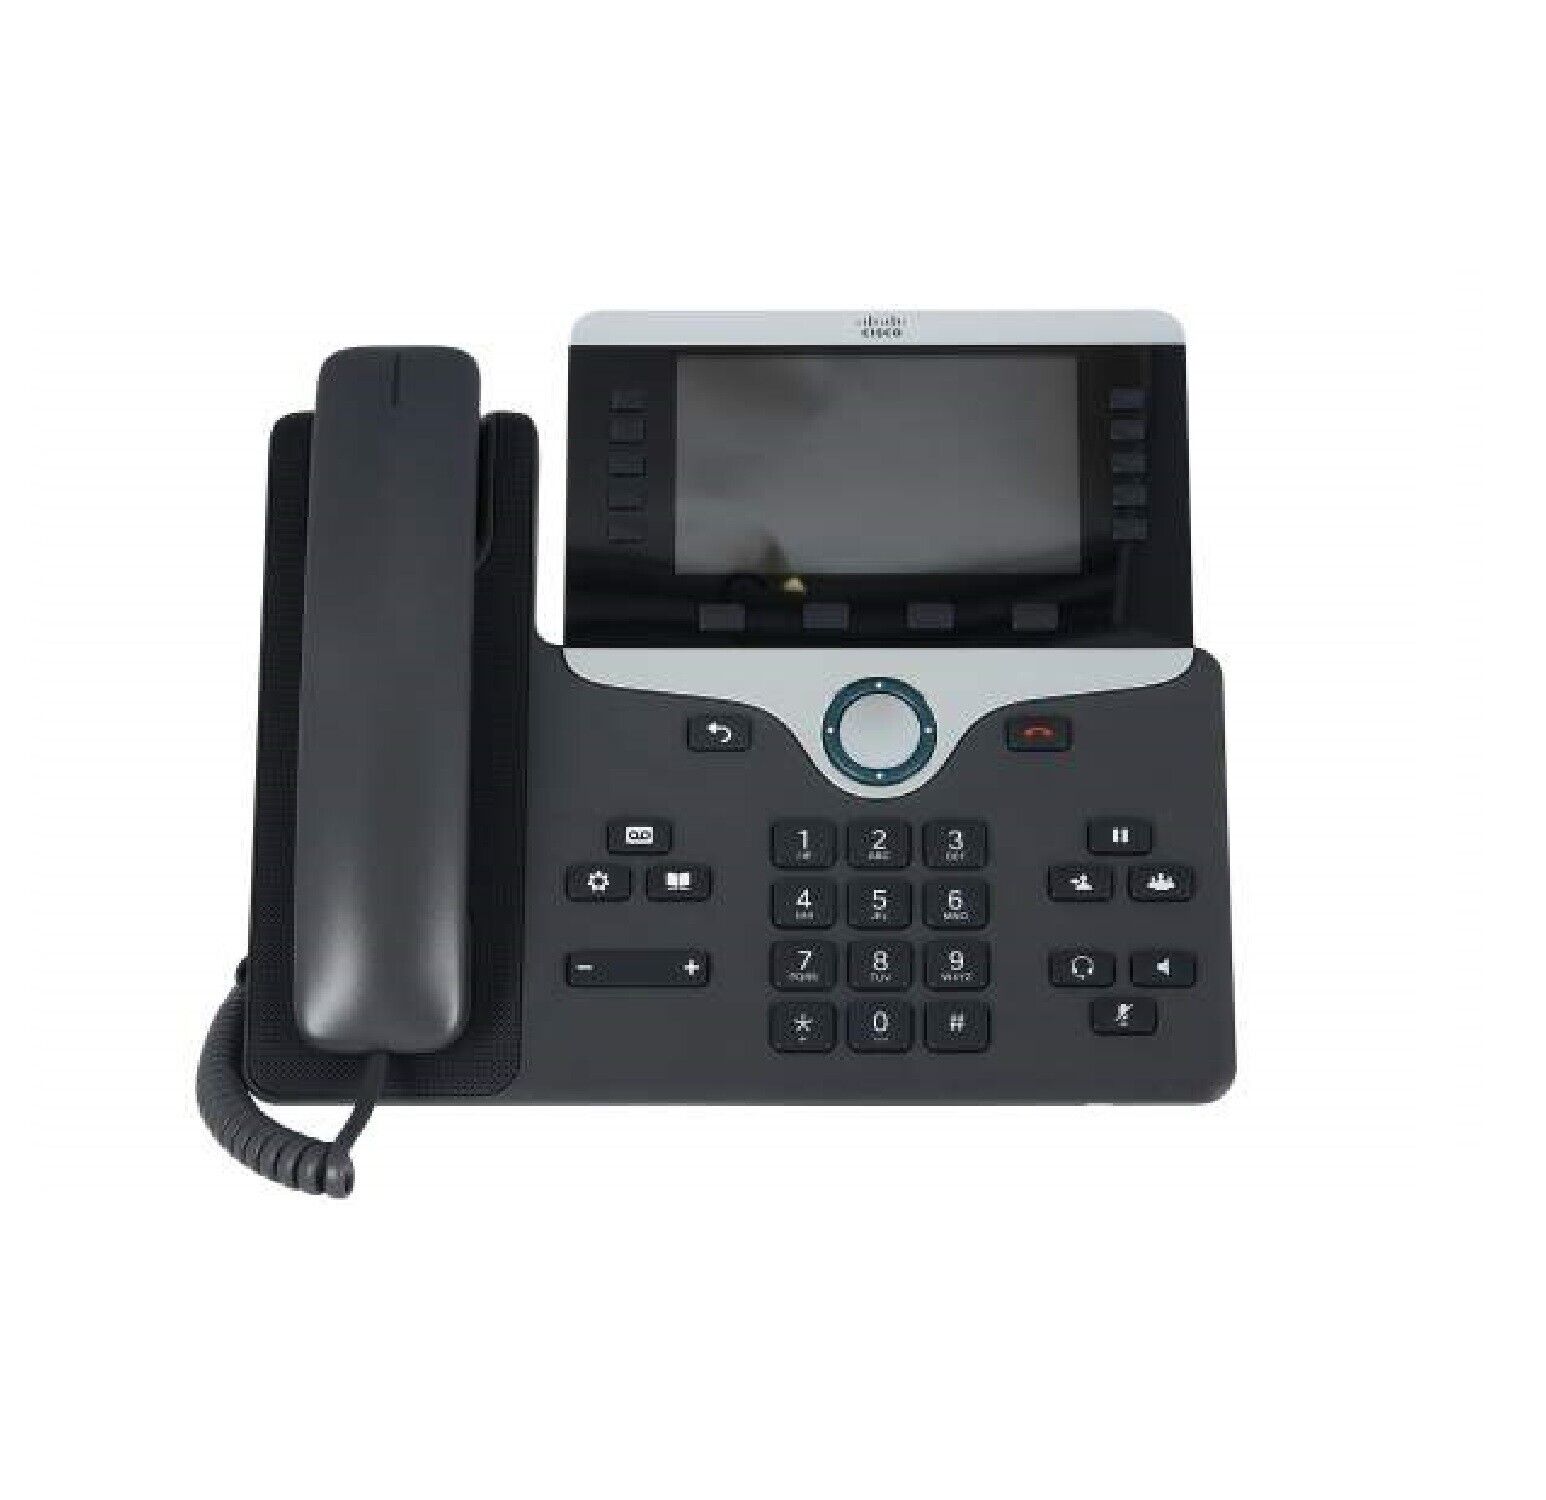 Cisco CP-8811-K9 Unified 8800 Series Wall Mountable IP Phone 1 Year Warranty